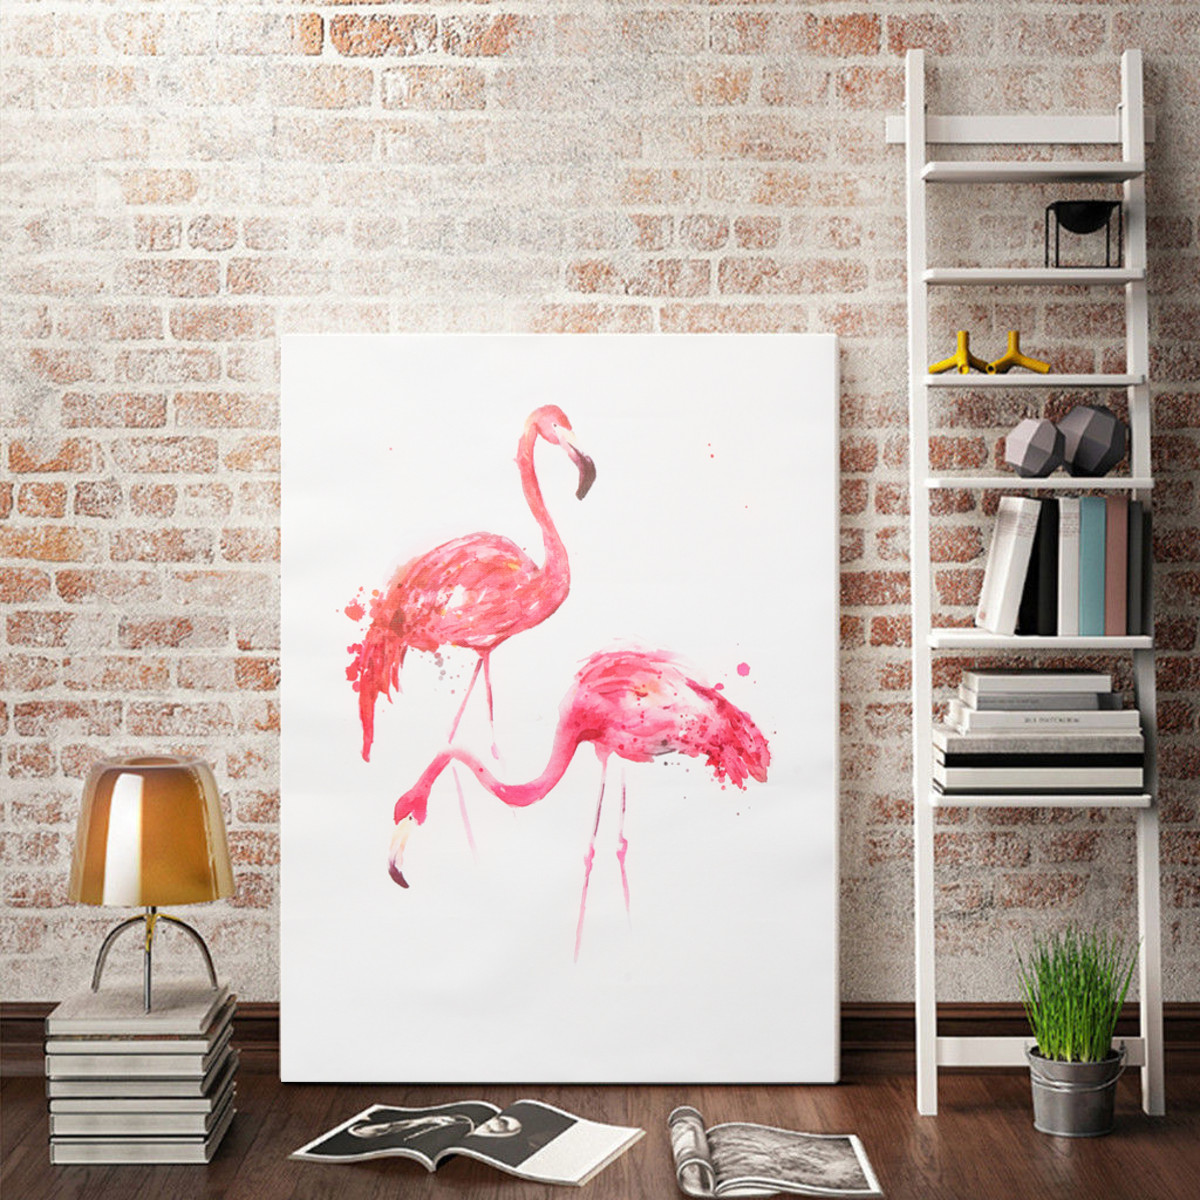 Unframed-Modern-Flamingo-Art-Canvas-Oil-Painting-Print-Wall-Hanging-Poster-Decorations-1349406